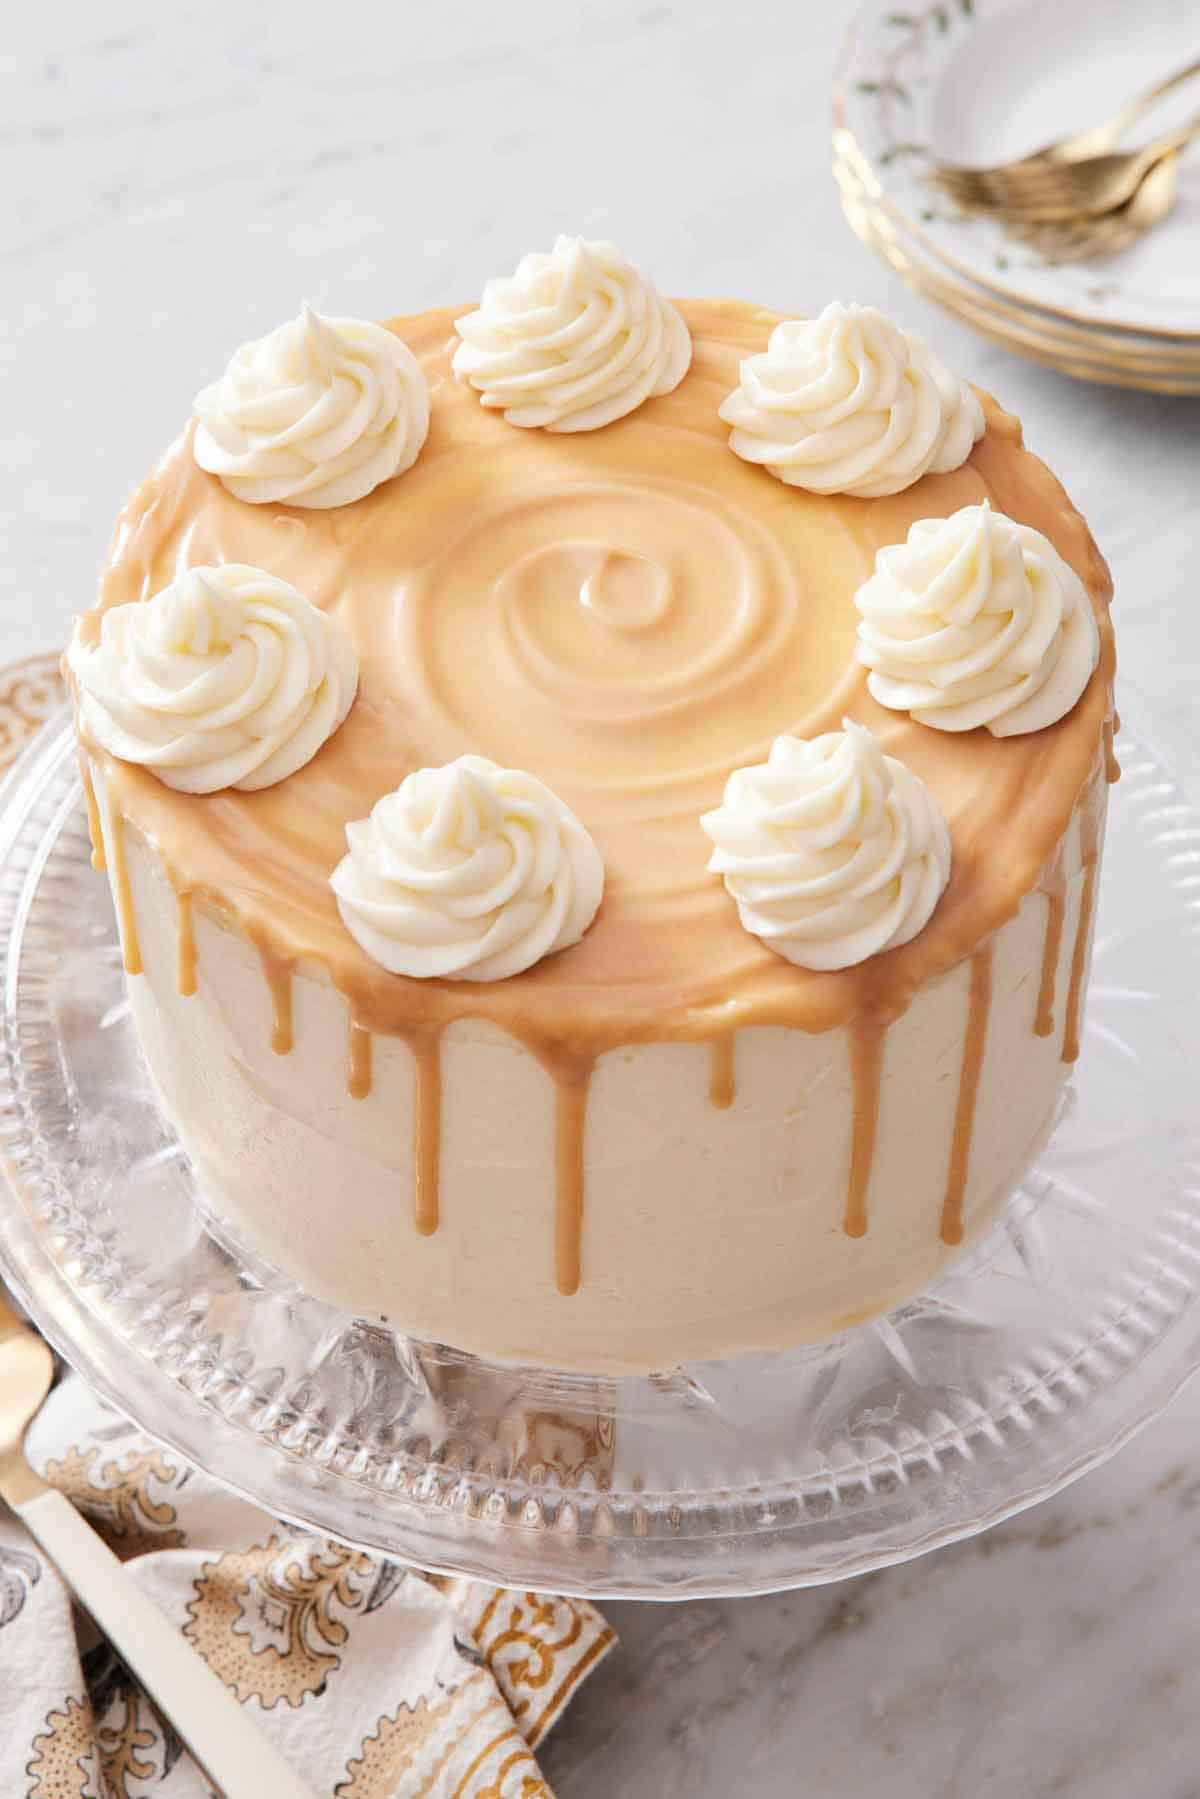 A butterscotch cake on a cake stand, topped with dollops of frosting over a layer of butterscotch.